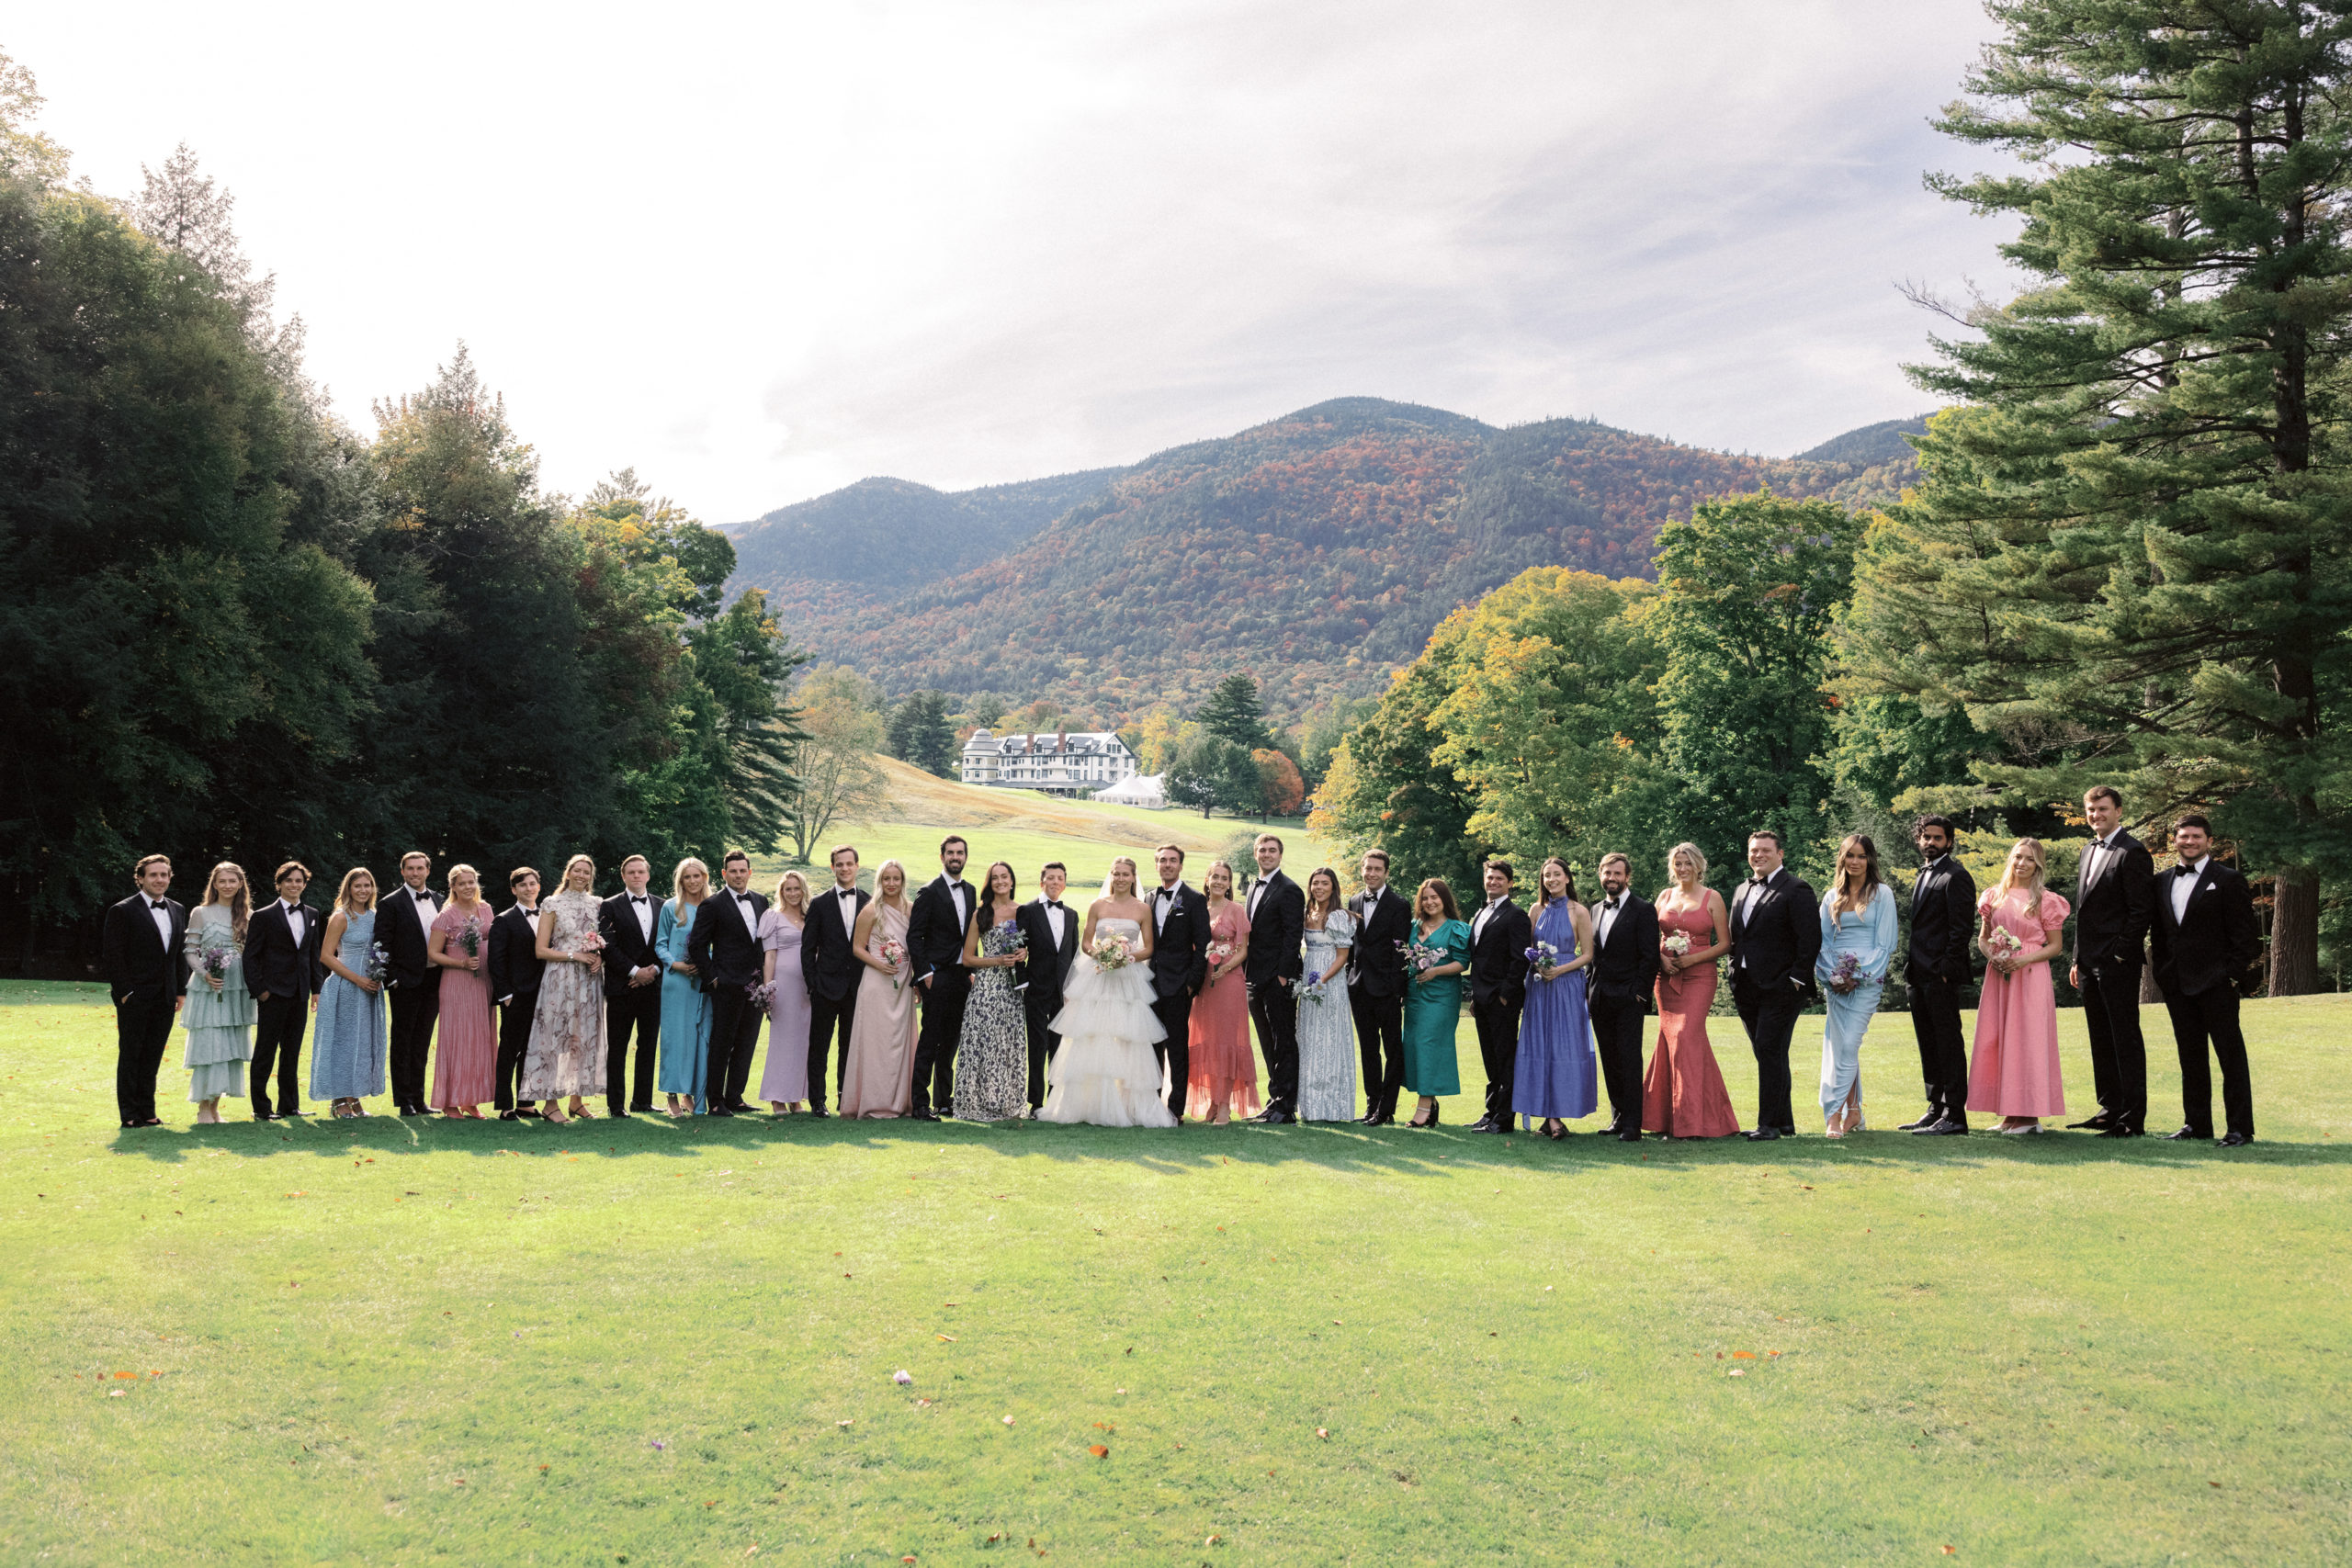 The bride, groom, bridesmaids & groomsmen in the golf course of The Ausable Club. Upstate NY wedding venues image by Jenny Fu Studio